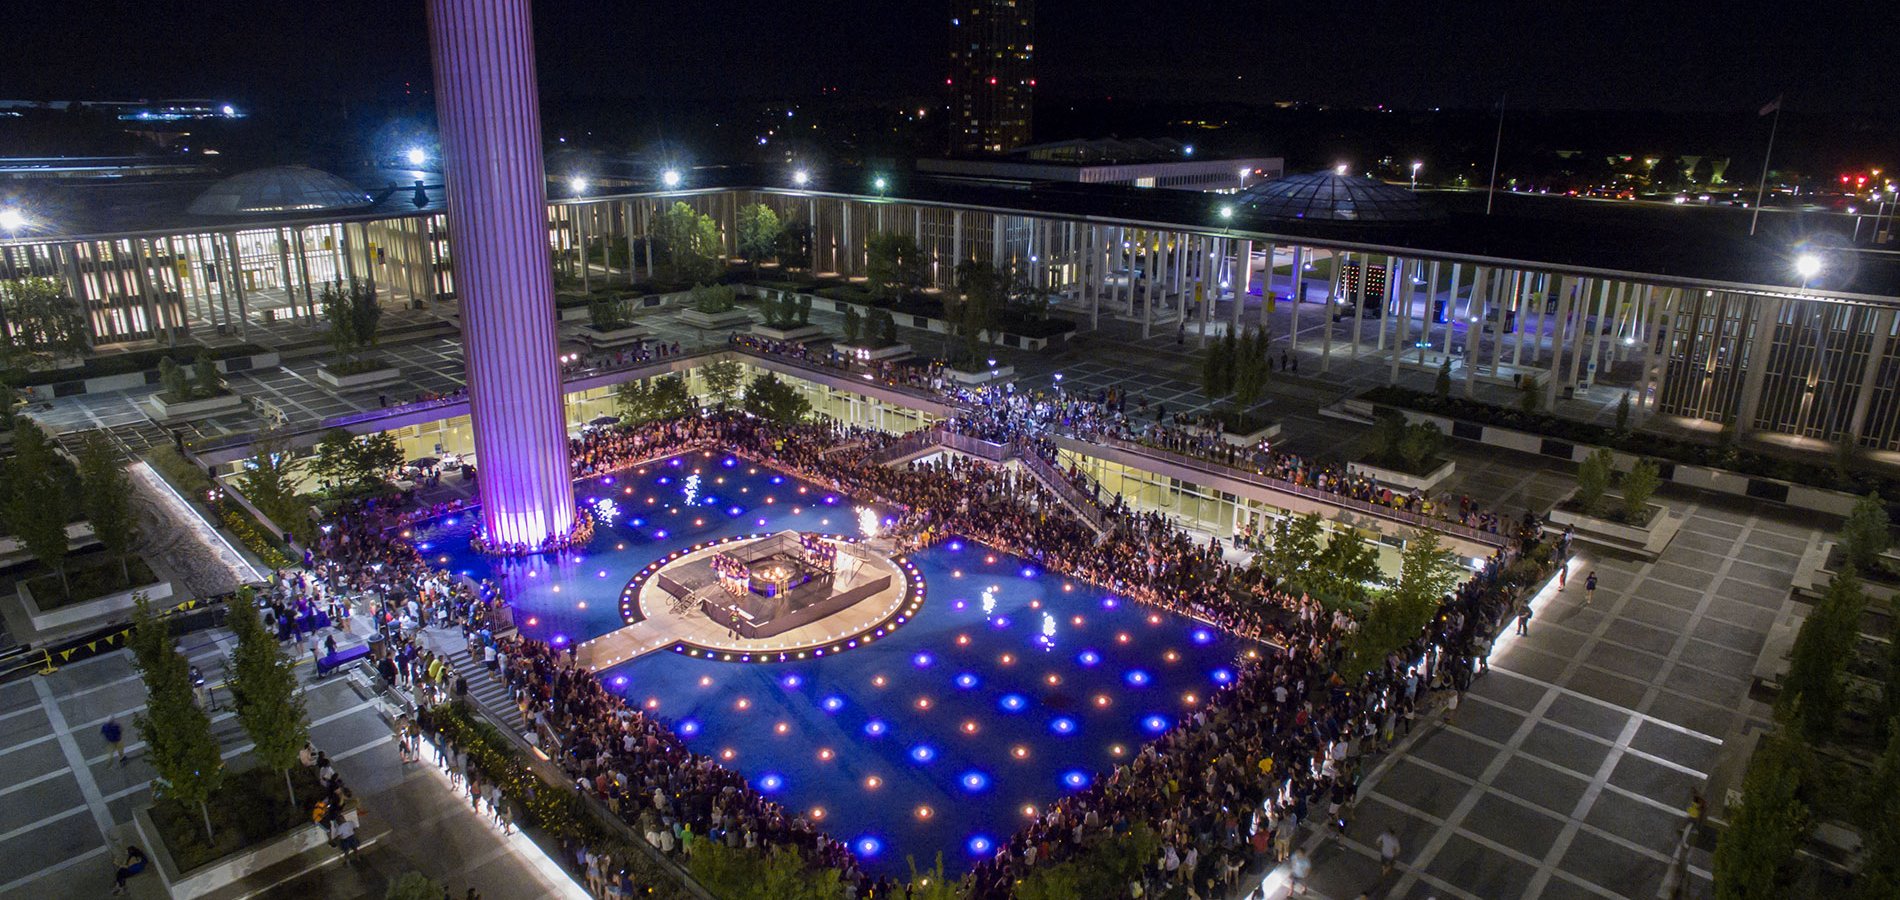 Event on campus, at night, at the main fountain